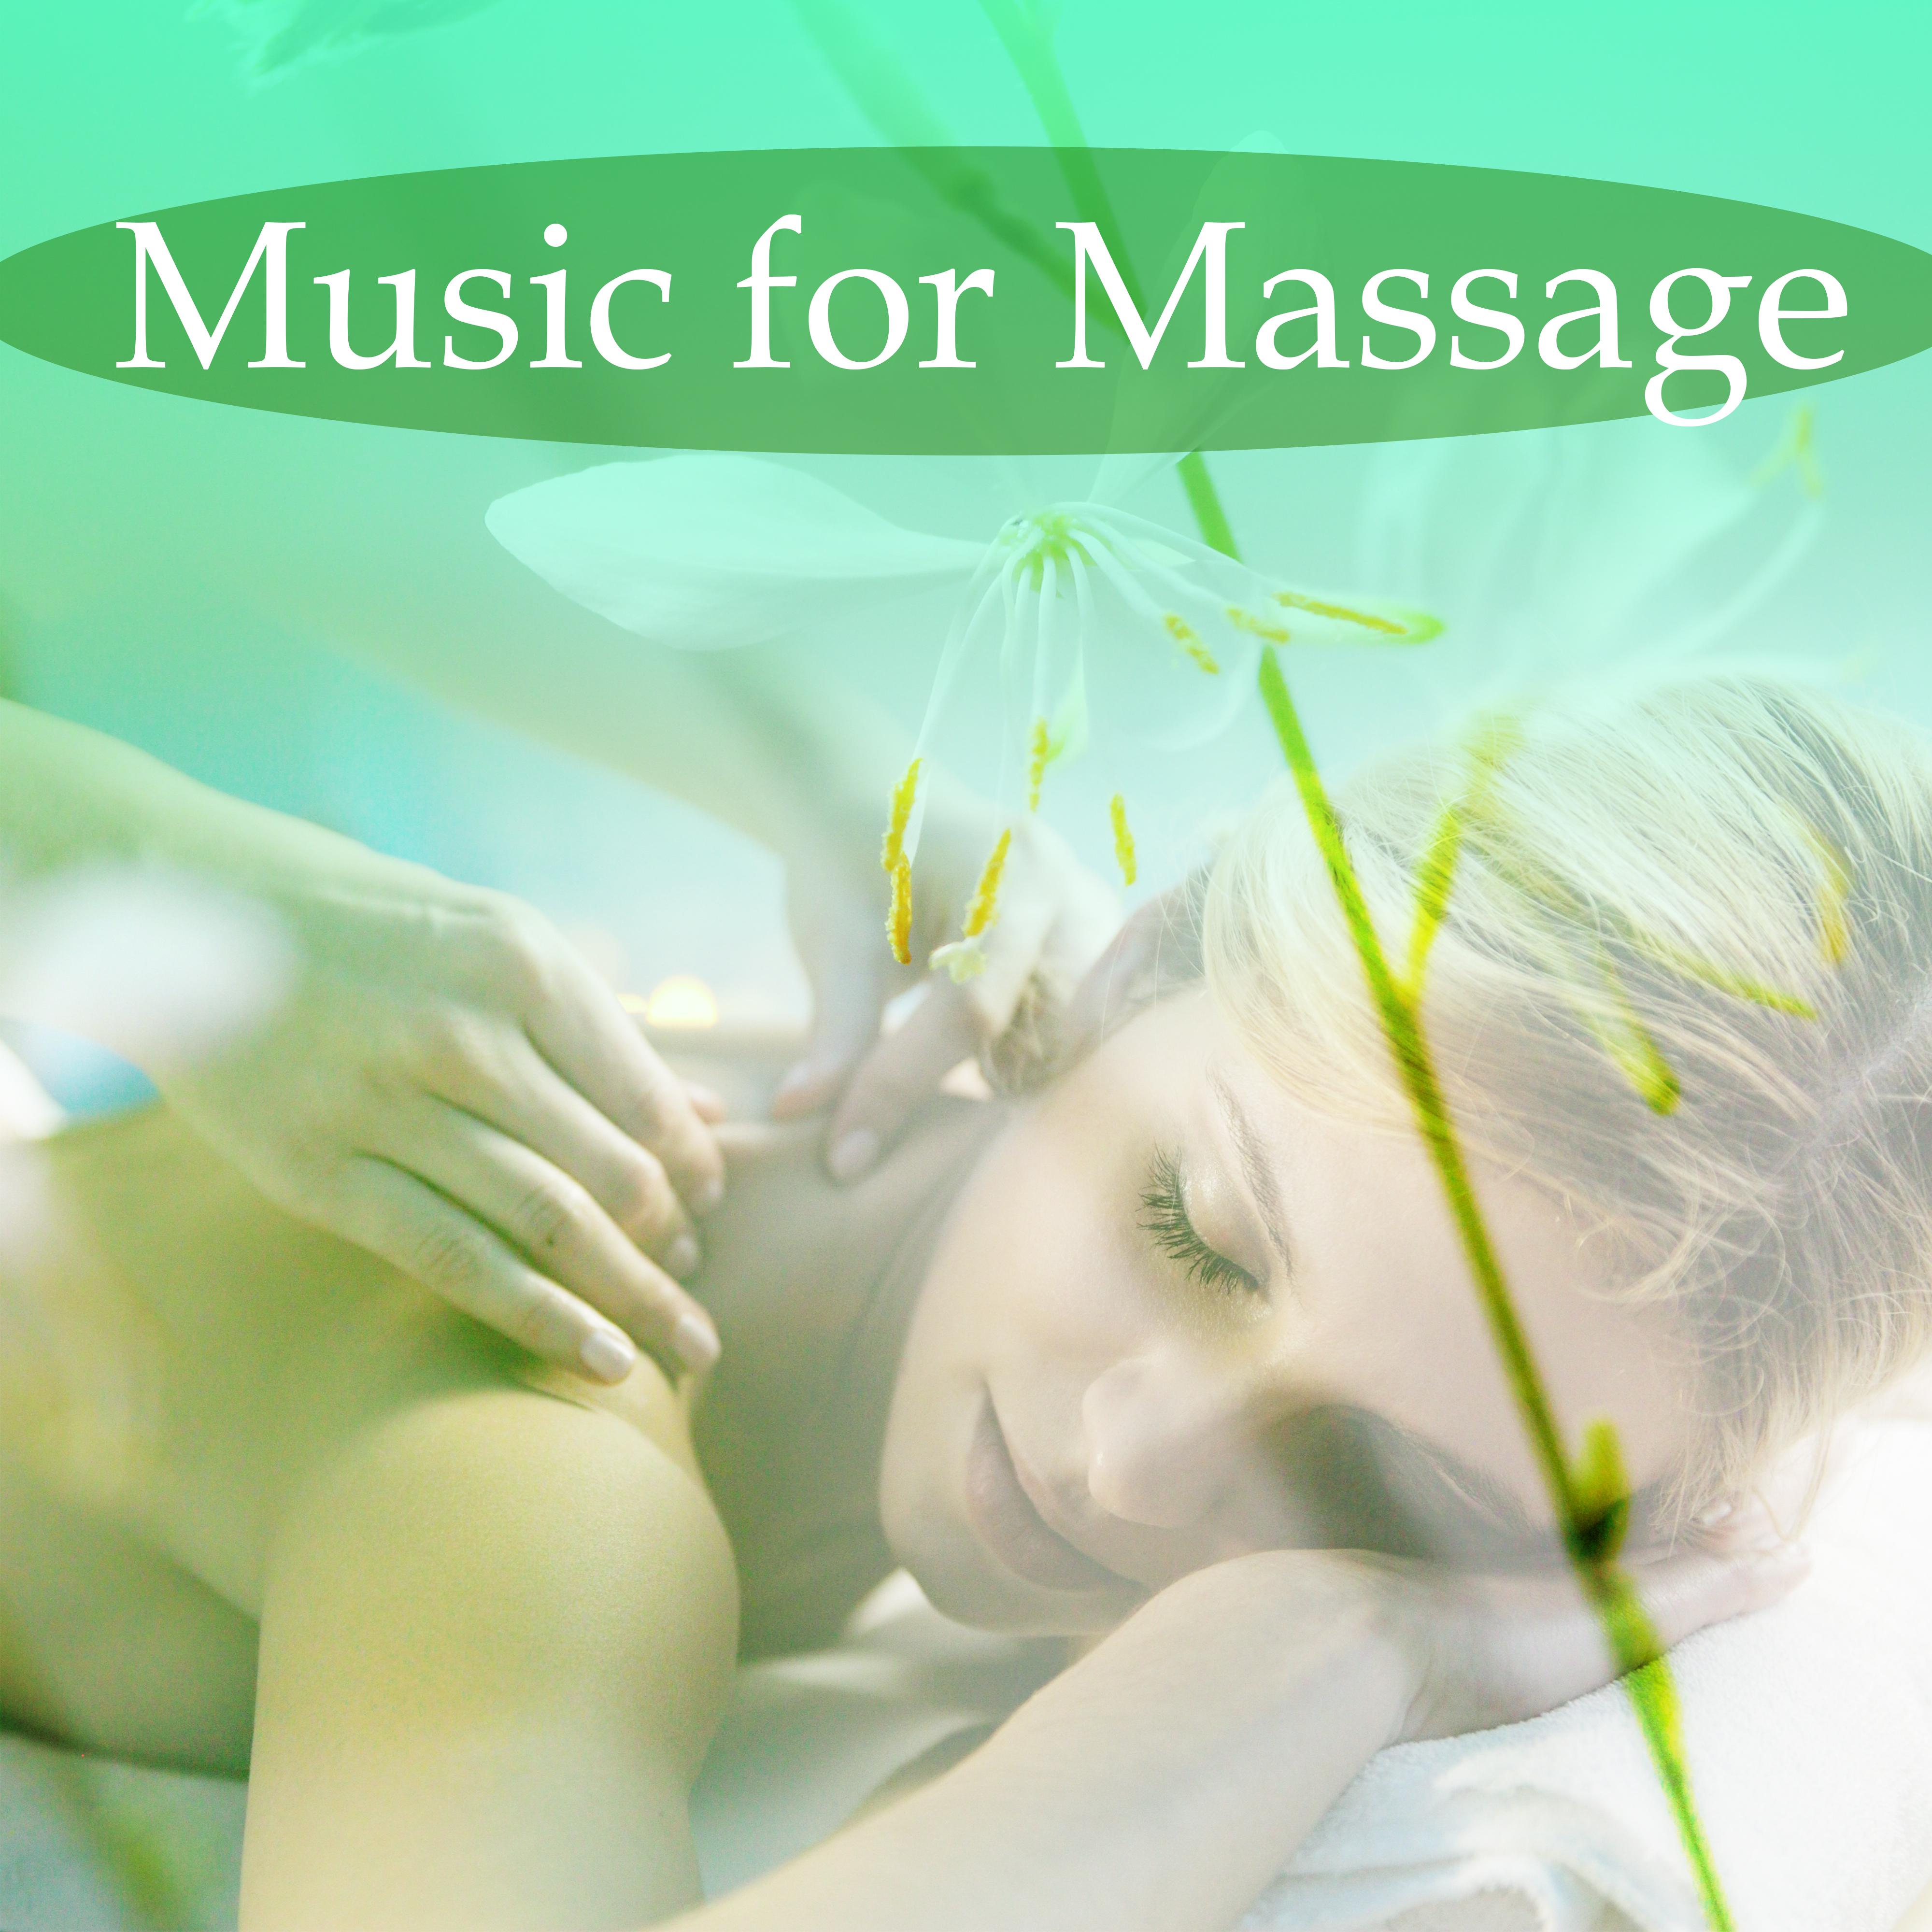 Music for Massage  Soothing Guitar, Pure Sleep, Spa Music, Wellness, Relief, Stress Free, Spa Dreams